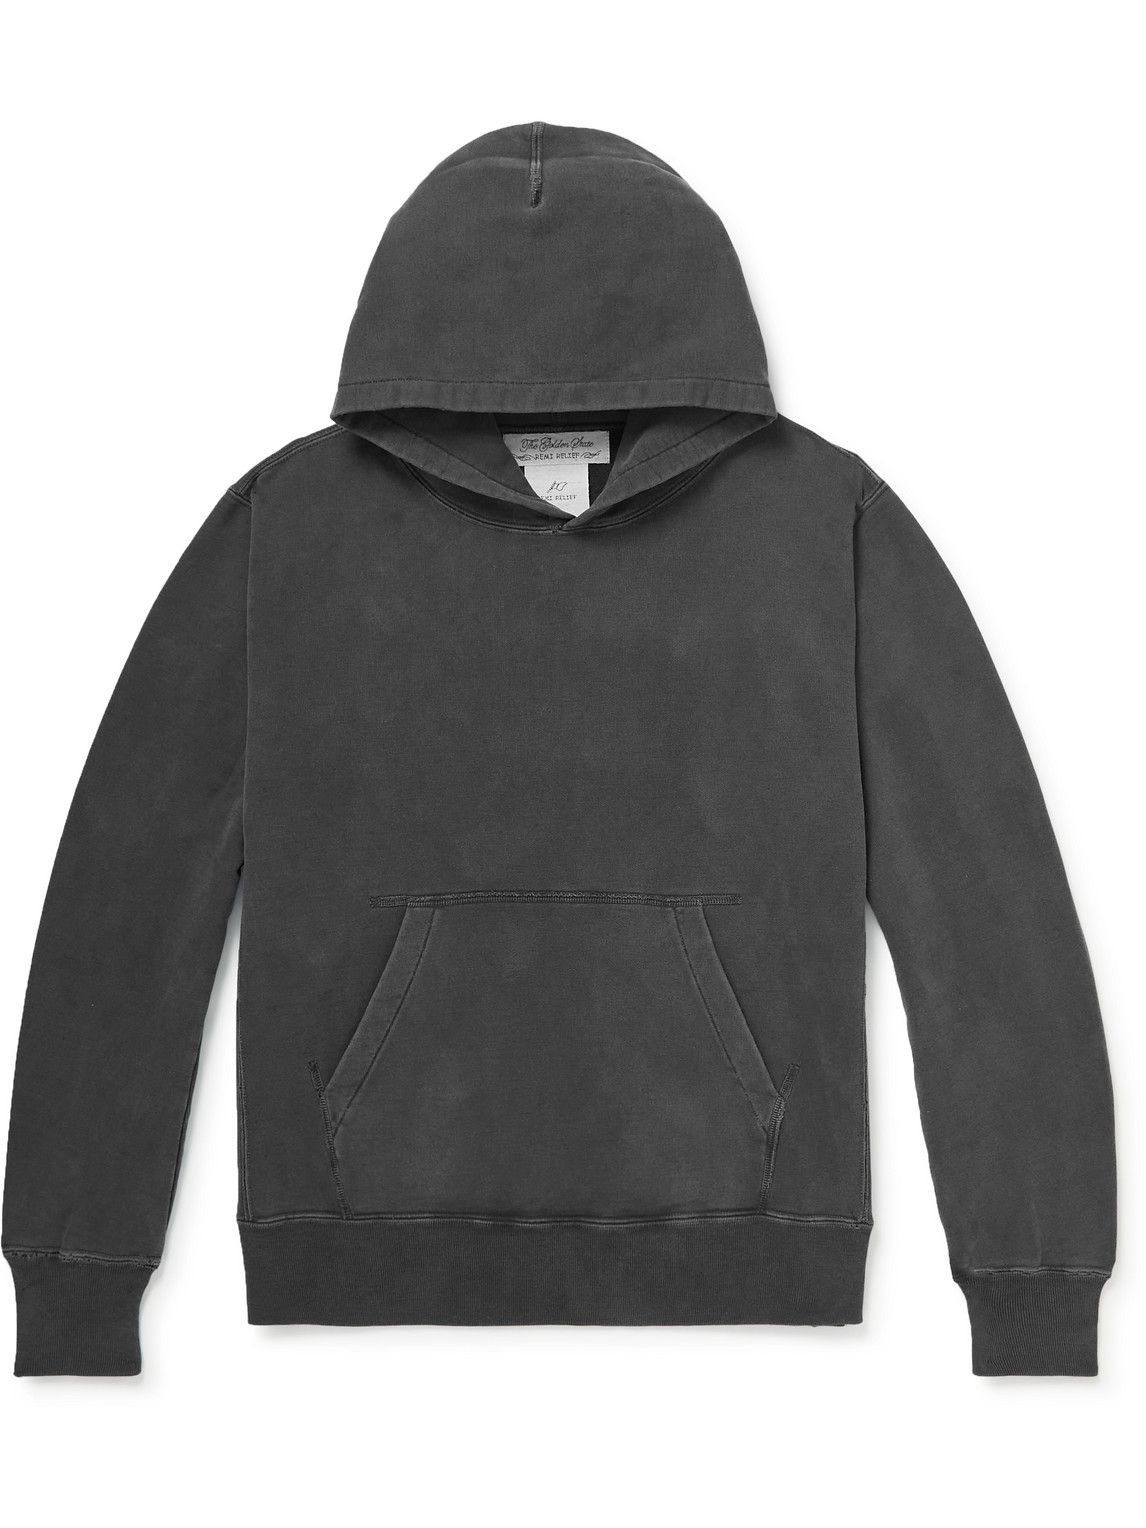 Remi Relief - Cotton-Jersey Hoodie - Black Remi Relief